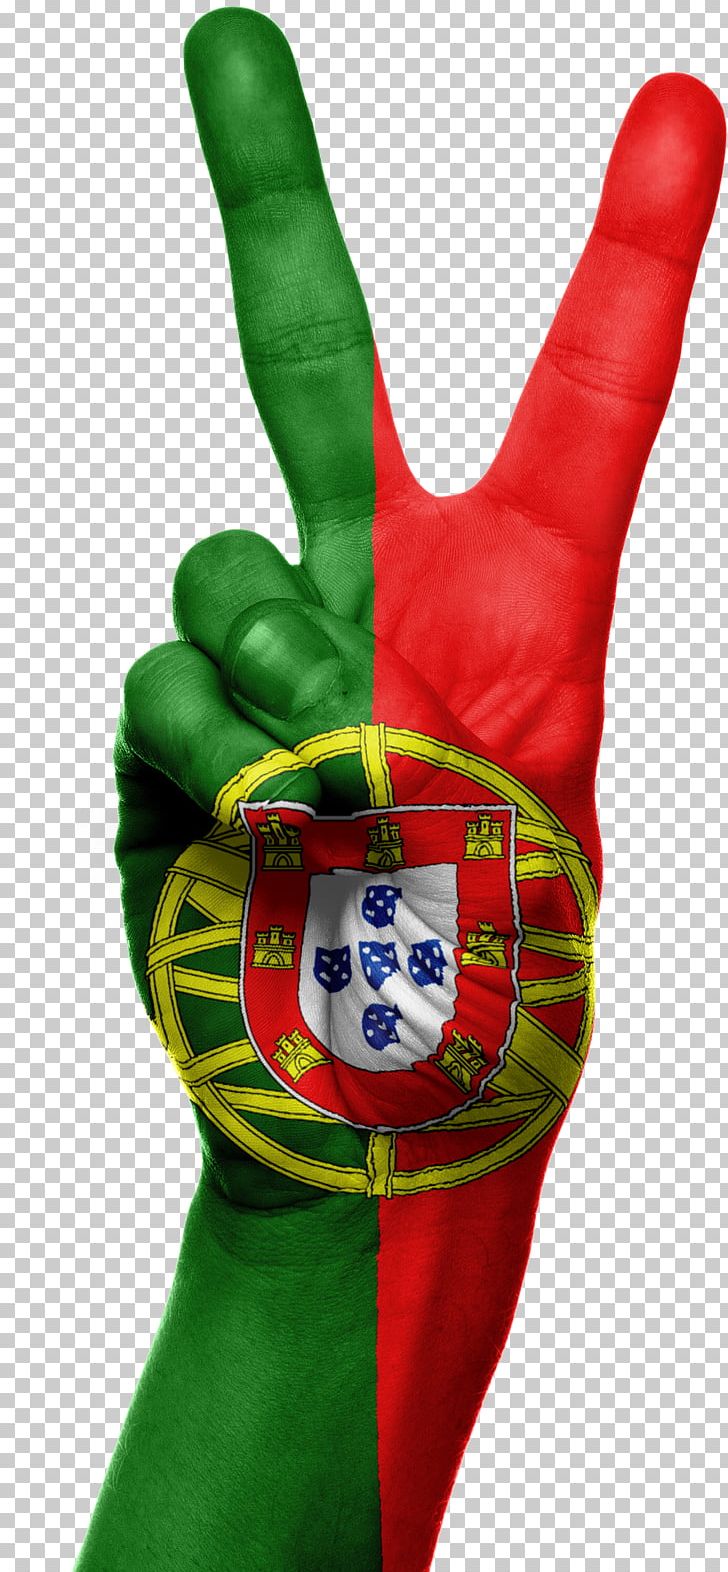 Flag Of Portugal Portugal National Football Team Portuguese Empire 5 October 1910 Revolution PNG, Clipart, 5 October 1910 Revolution, Cristiano Ronaldo, Fictional Character, Finger, Flag Free PNG Download